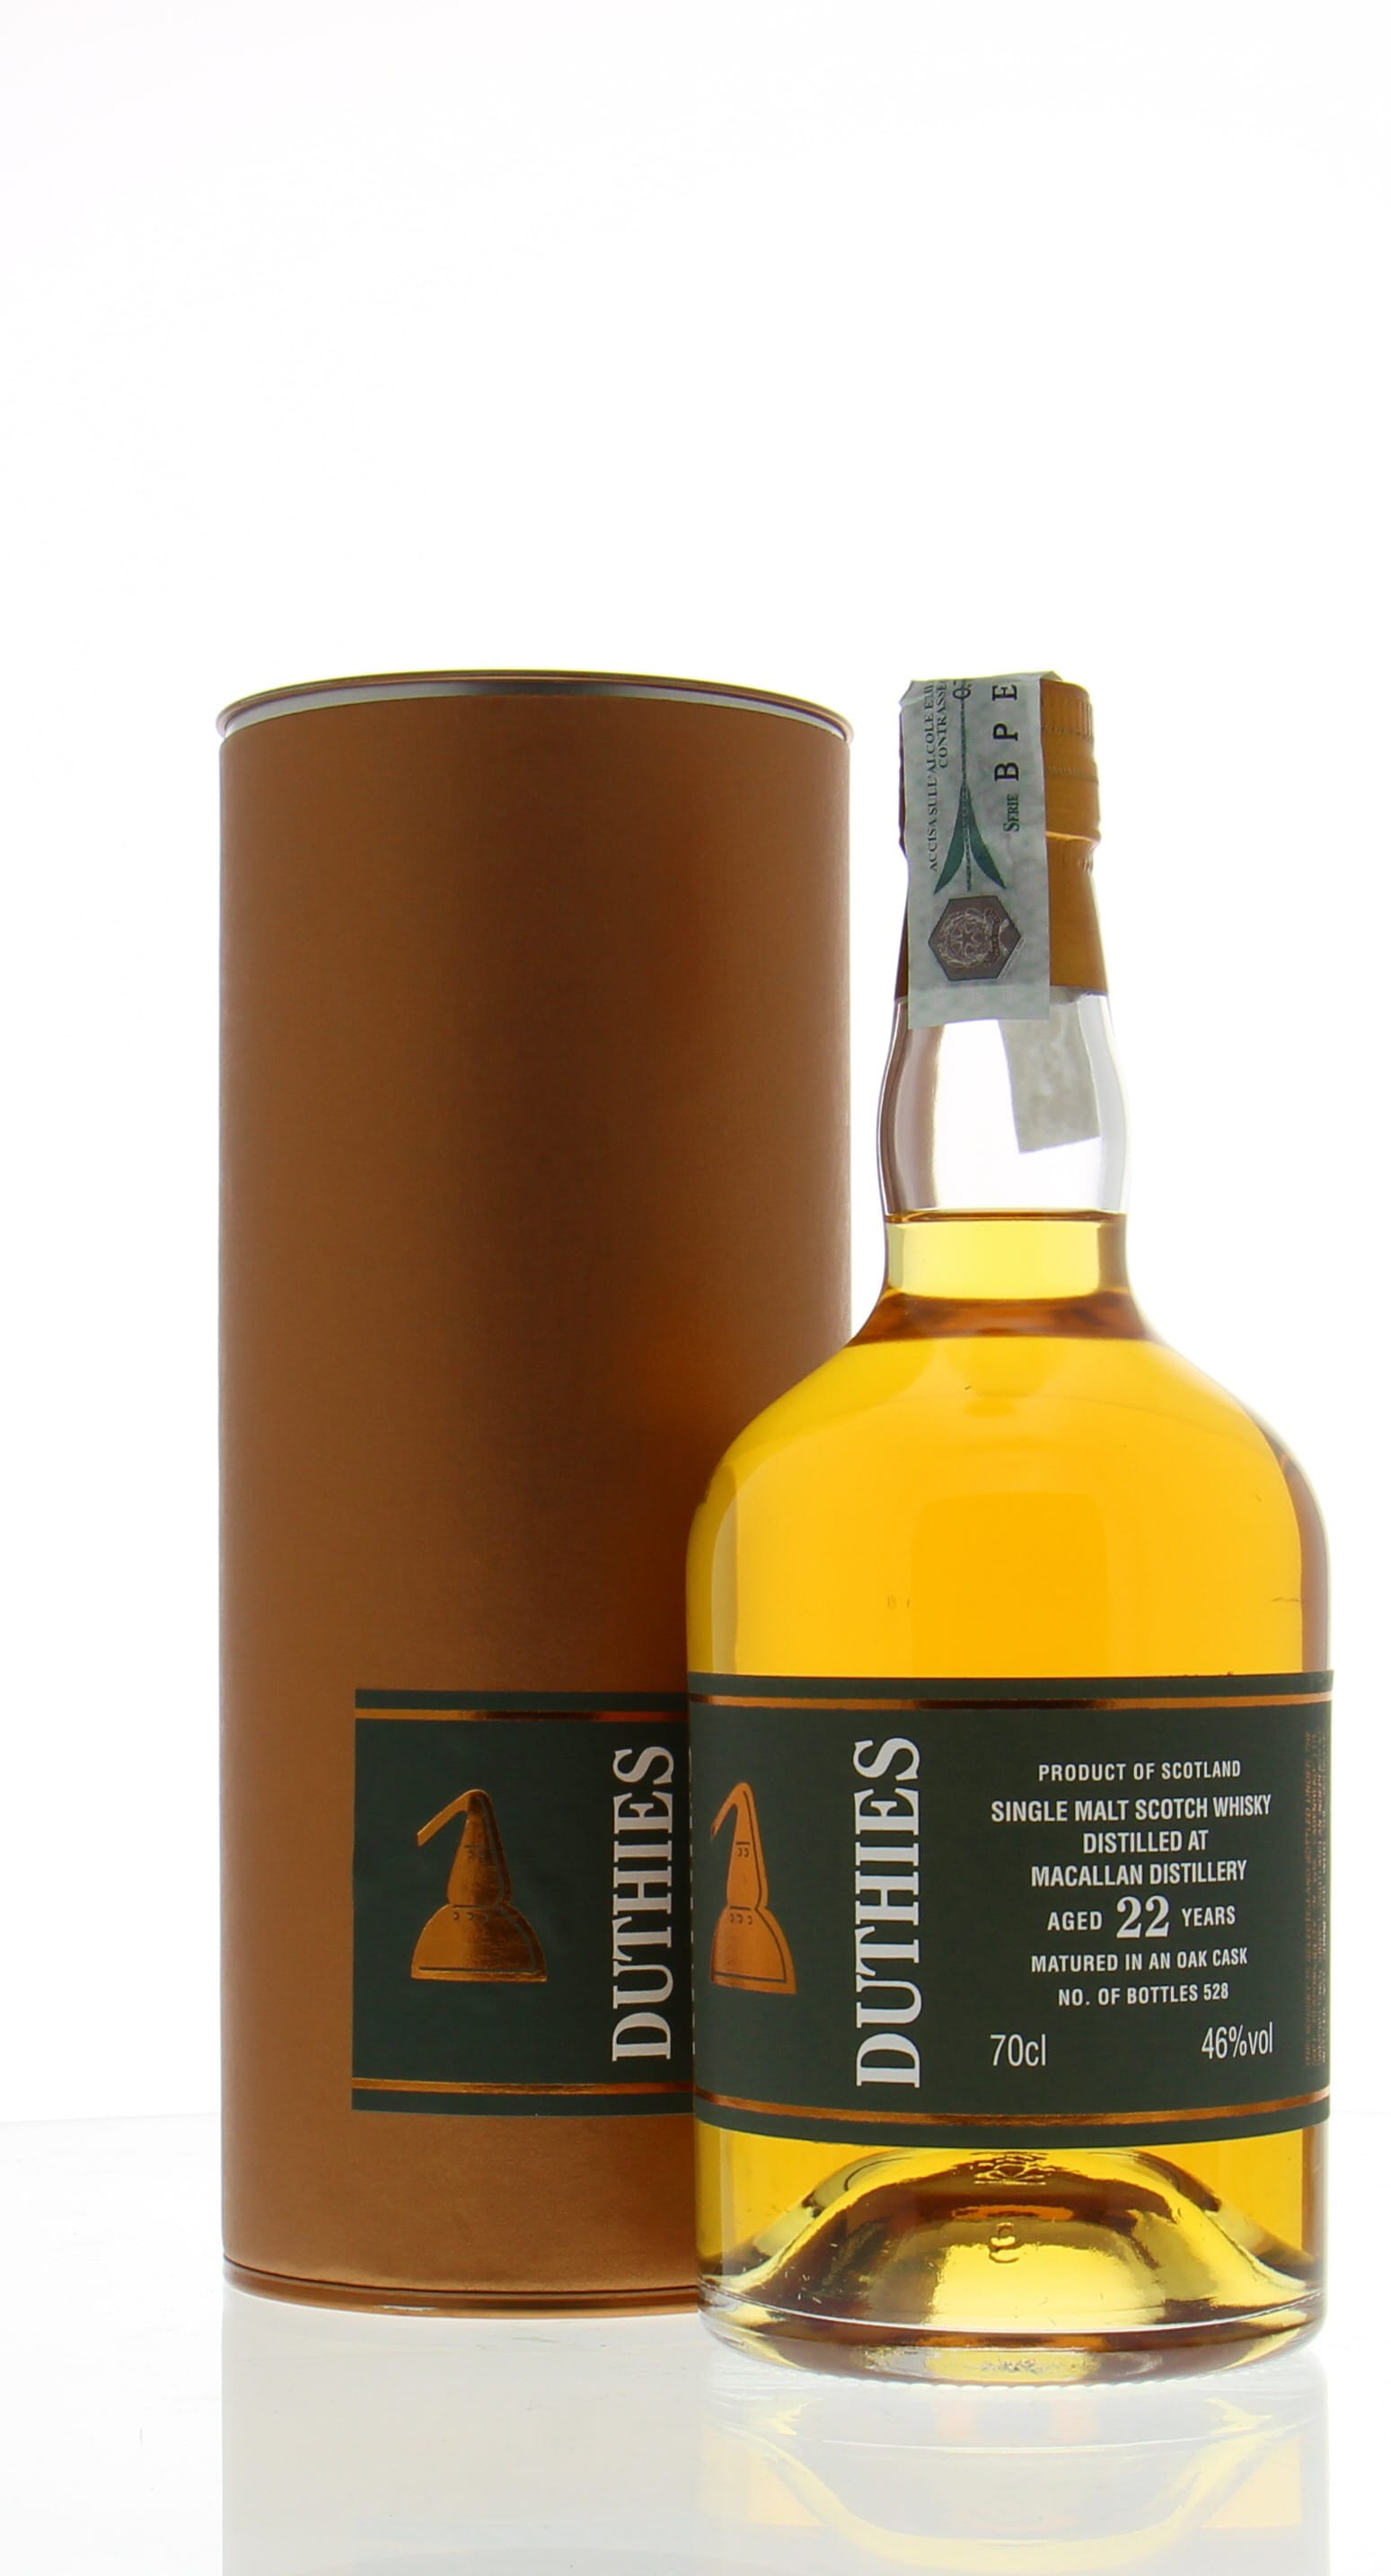 Macallan - 22 years Old Duthies Cadenhead1 0f 528 bottles 46% NV In Original Container